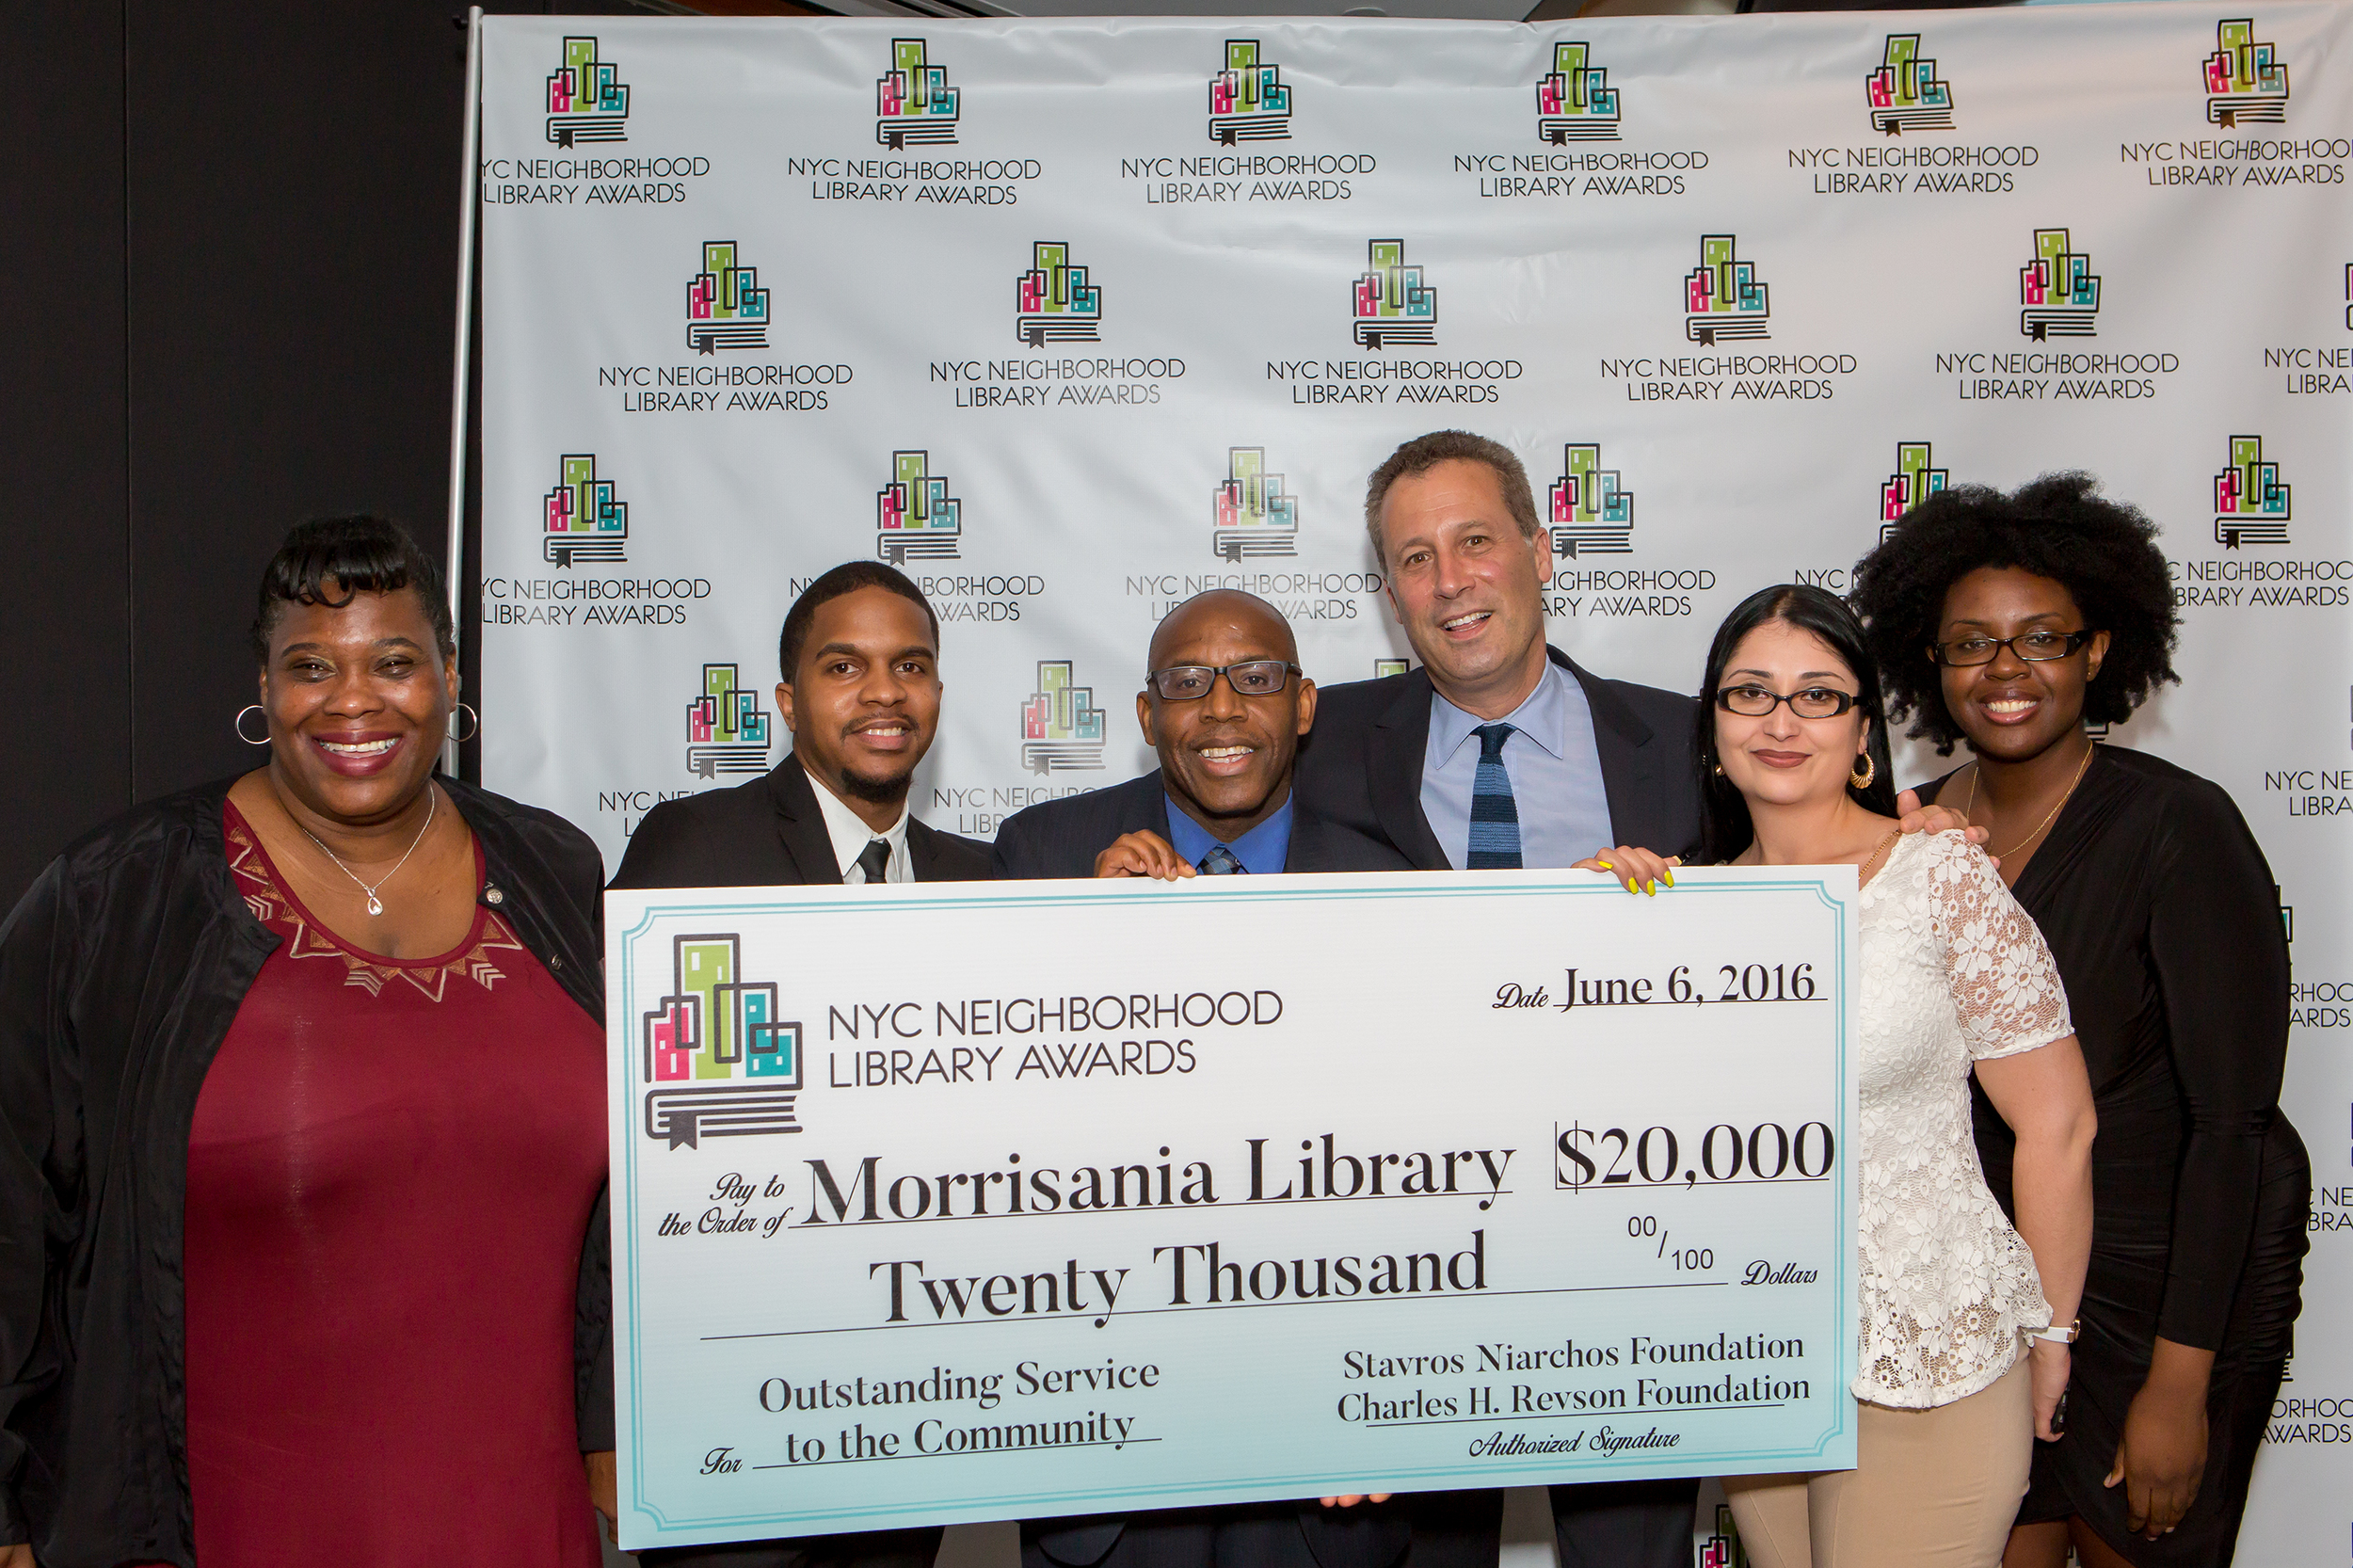 Staff Members of the Morrisania Library and Tony Marx, President and CEO of the New York Public Library